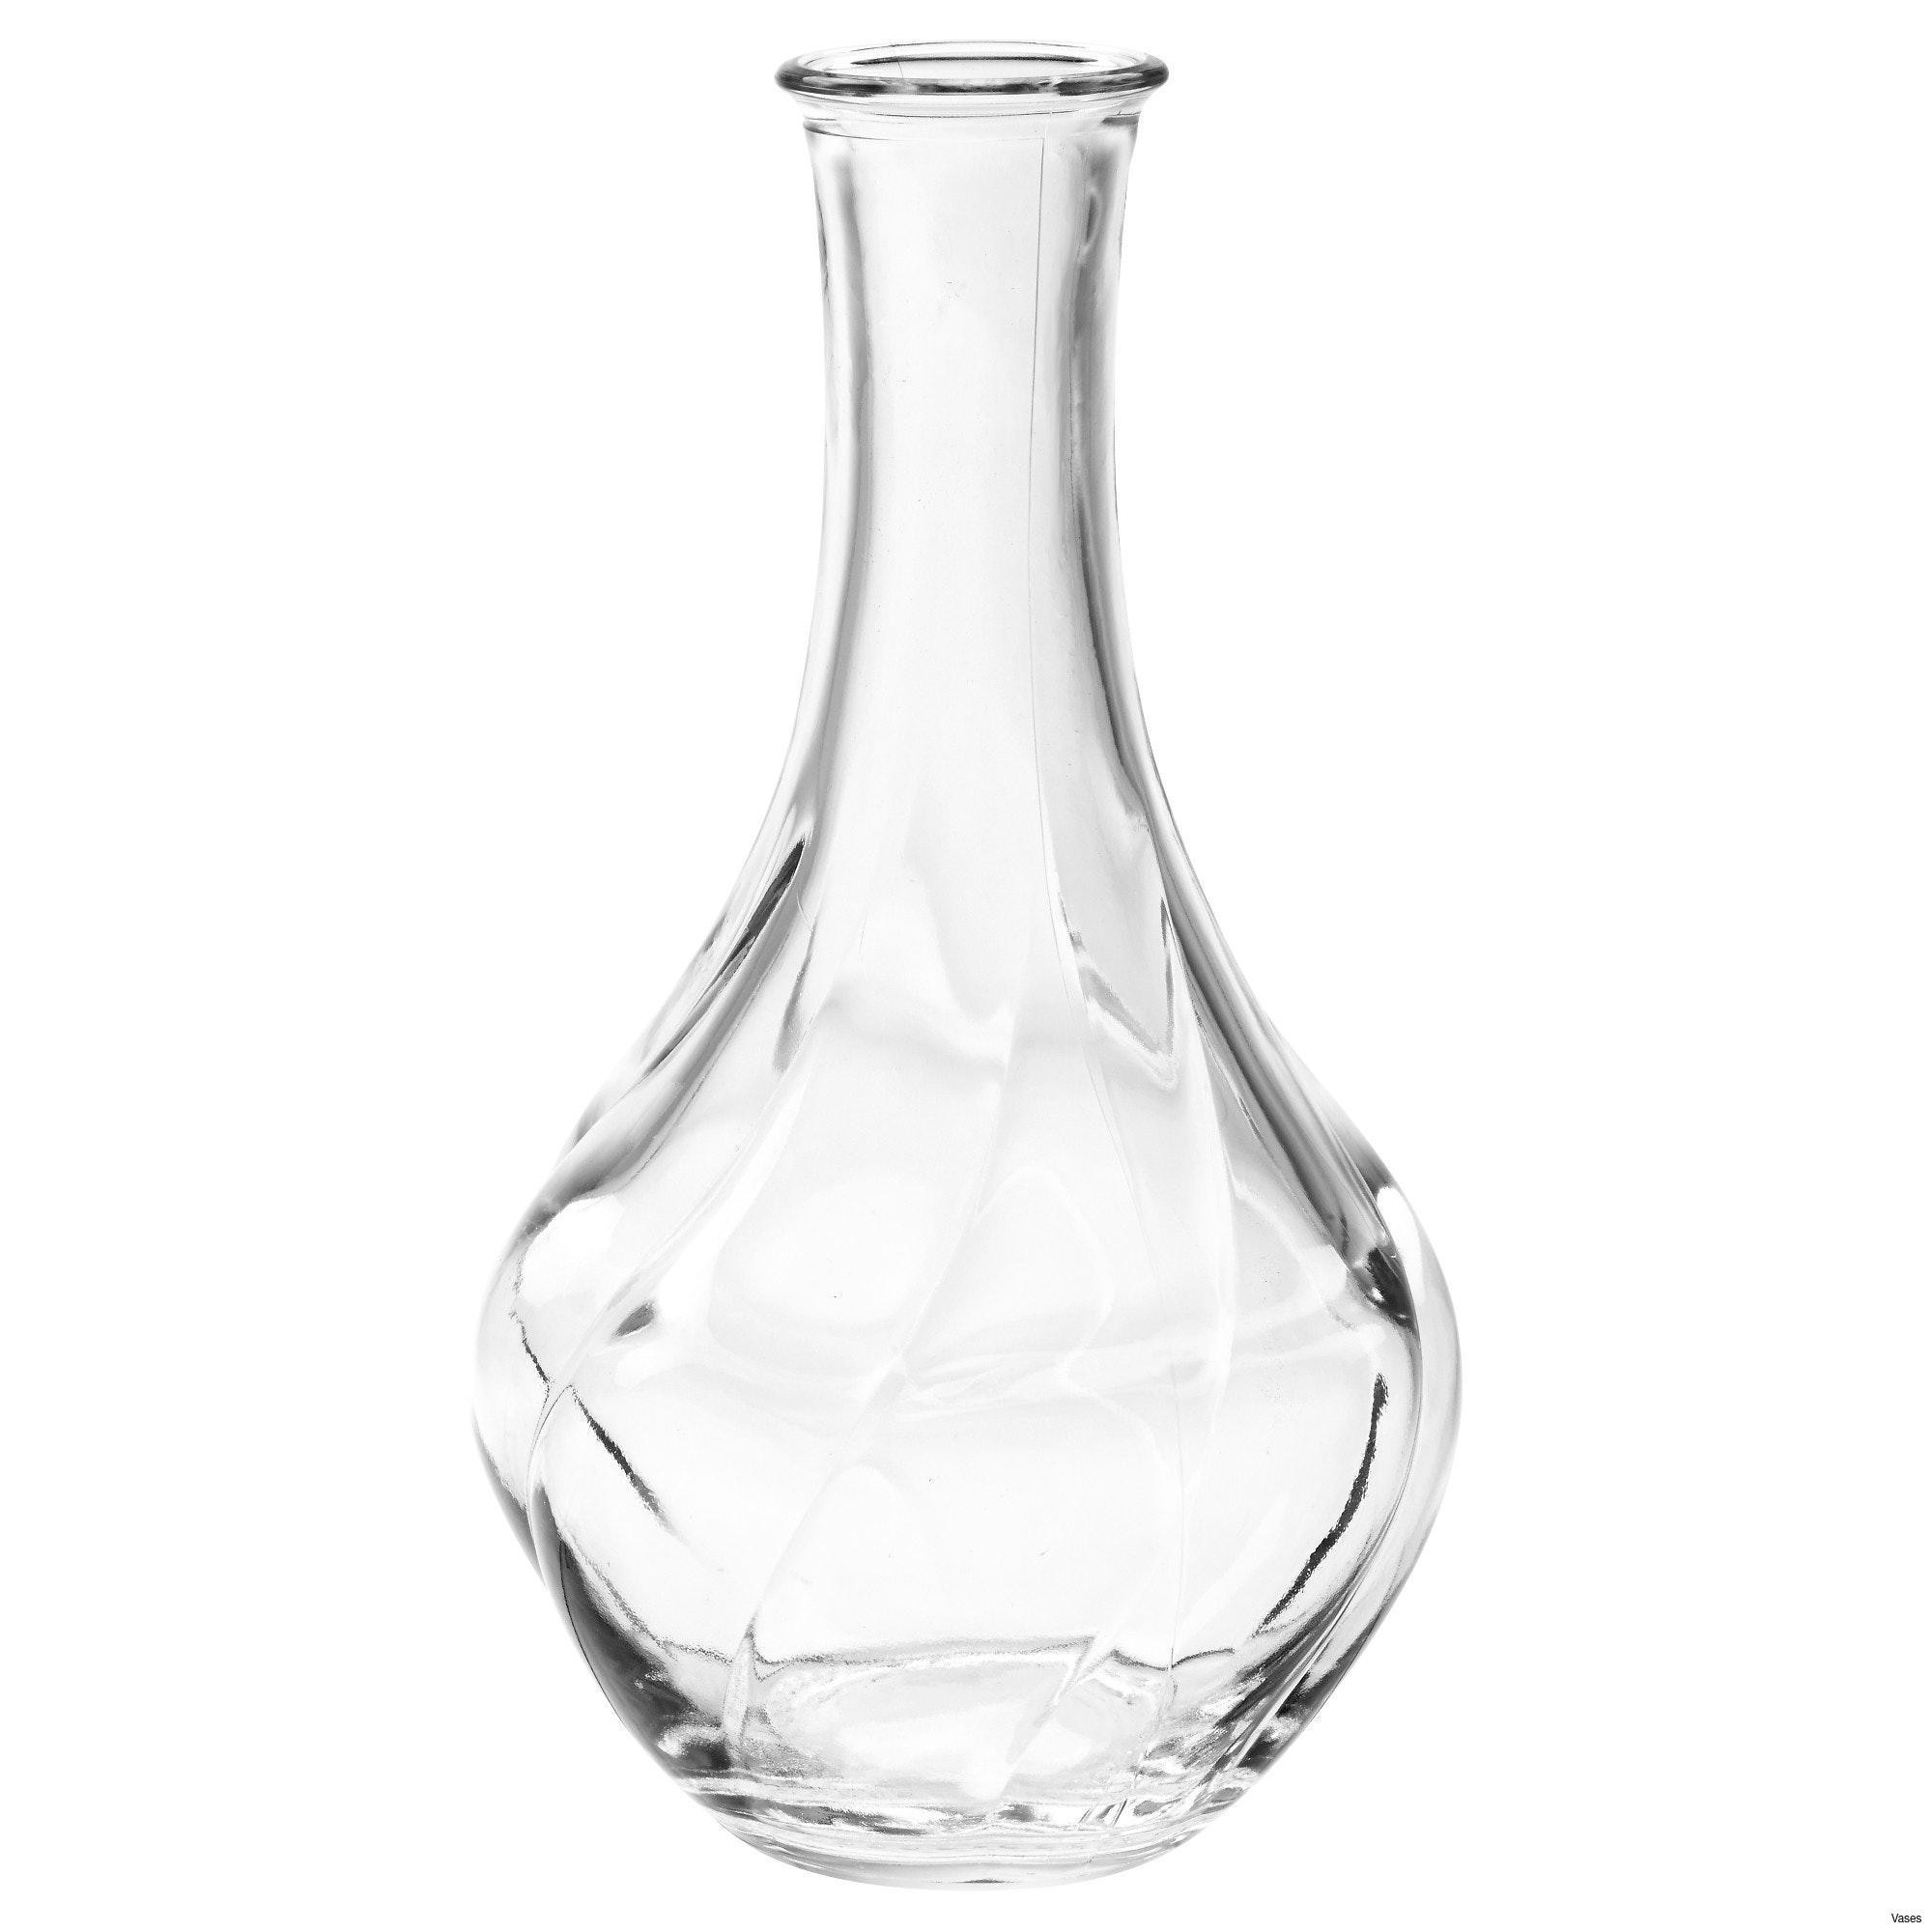 large indoor flower vases of large glass vase photos vases flower floor vase with flowersi 0d throughout large glass vase gallery living room glass vases fresh clear vase 0d tags amazing and of